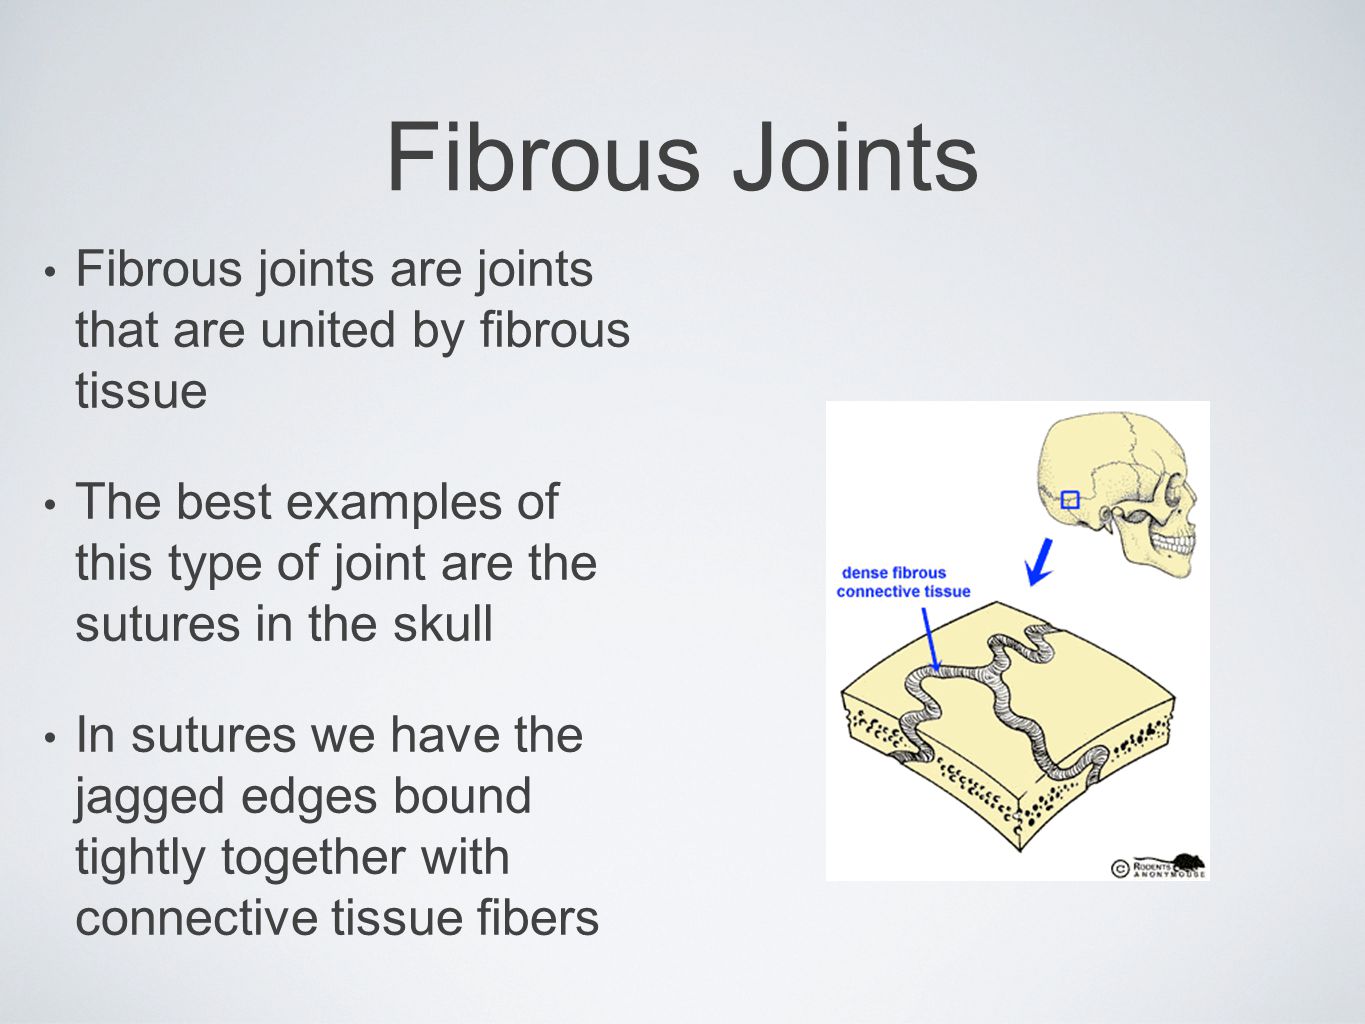 Fibrous Joints Fibrous joints are joints that are united by fibrous tissue. The best examples of this type of joint are the sutures in the skull.